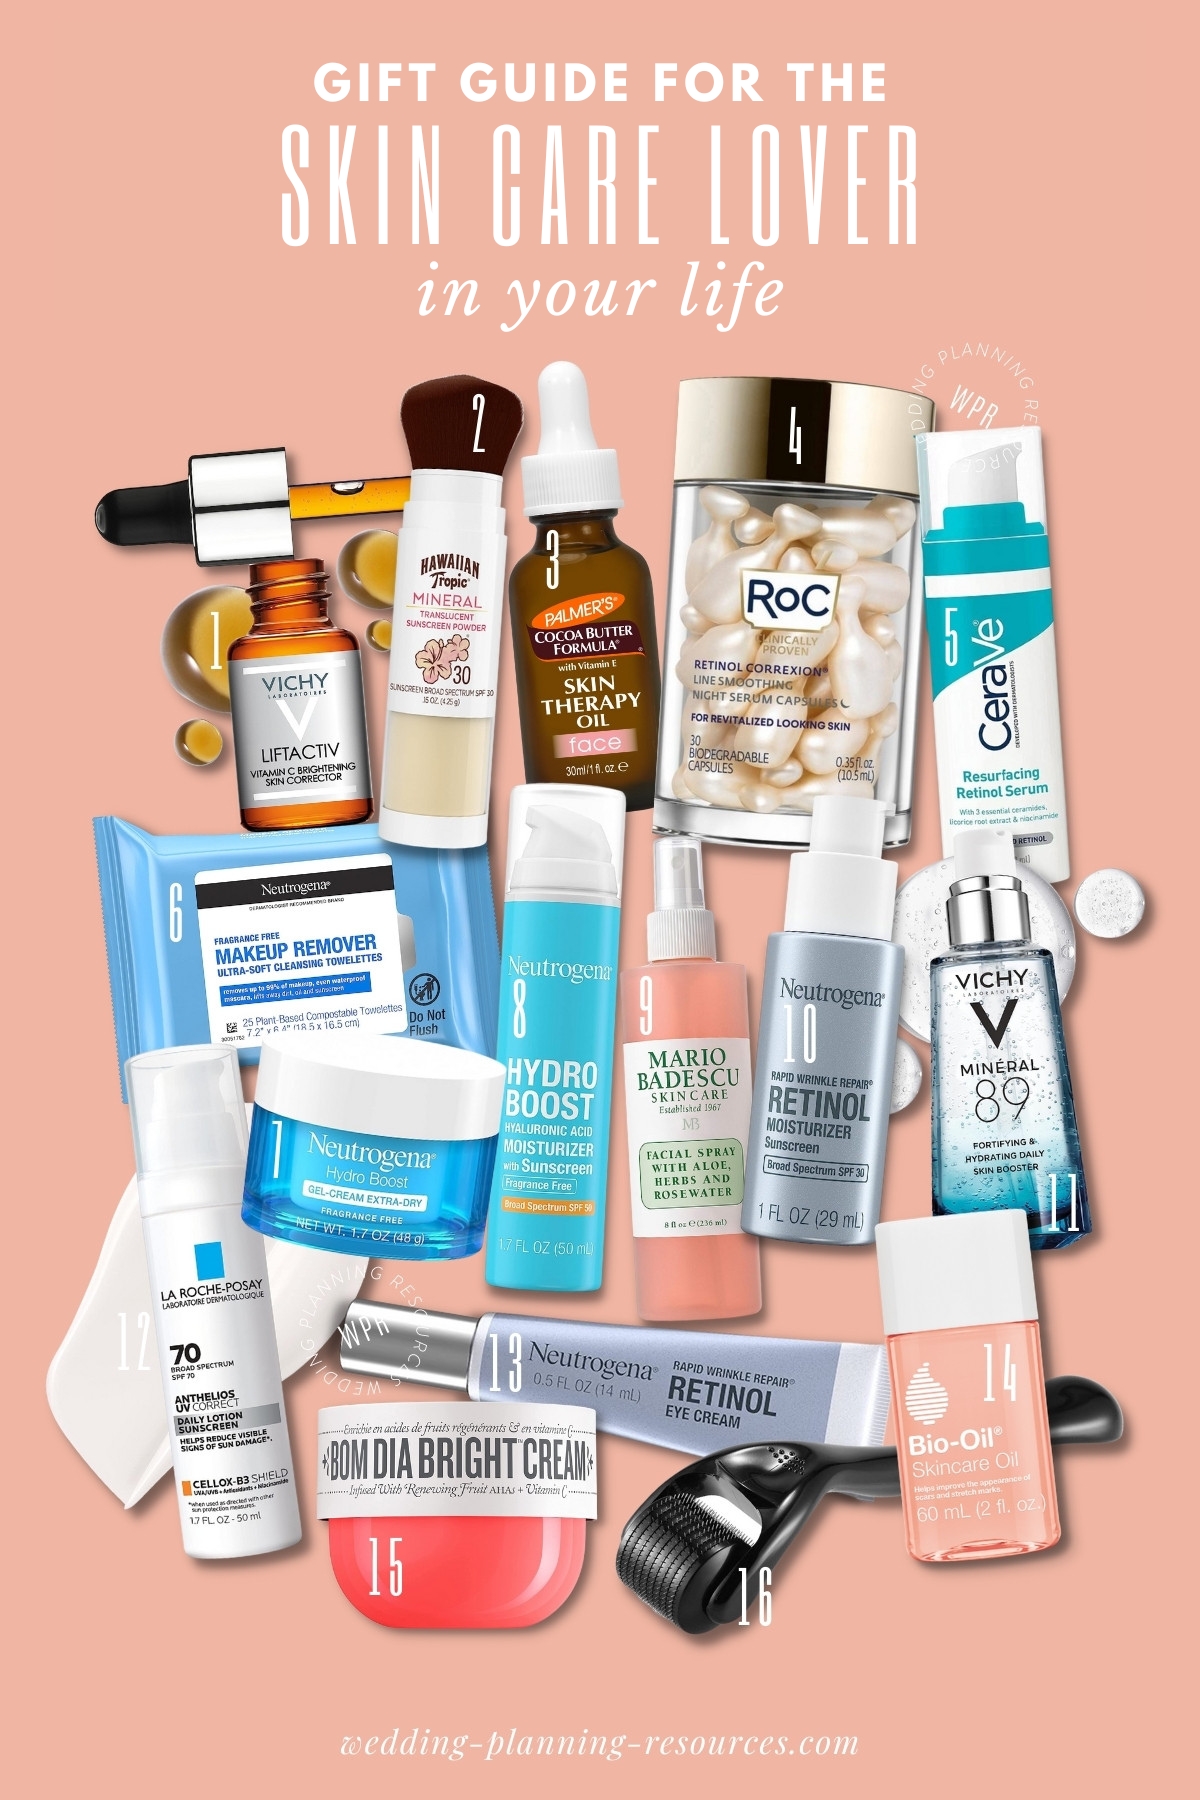 Skin Care : Gift Guide